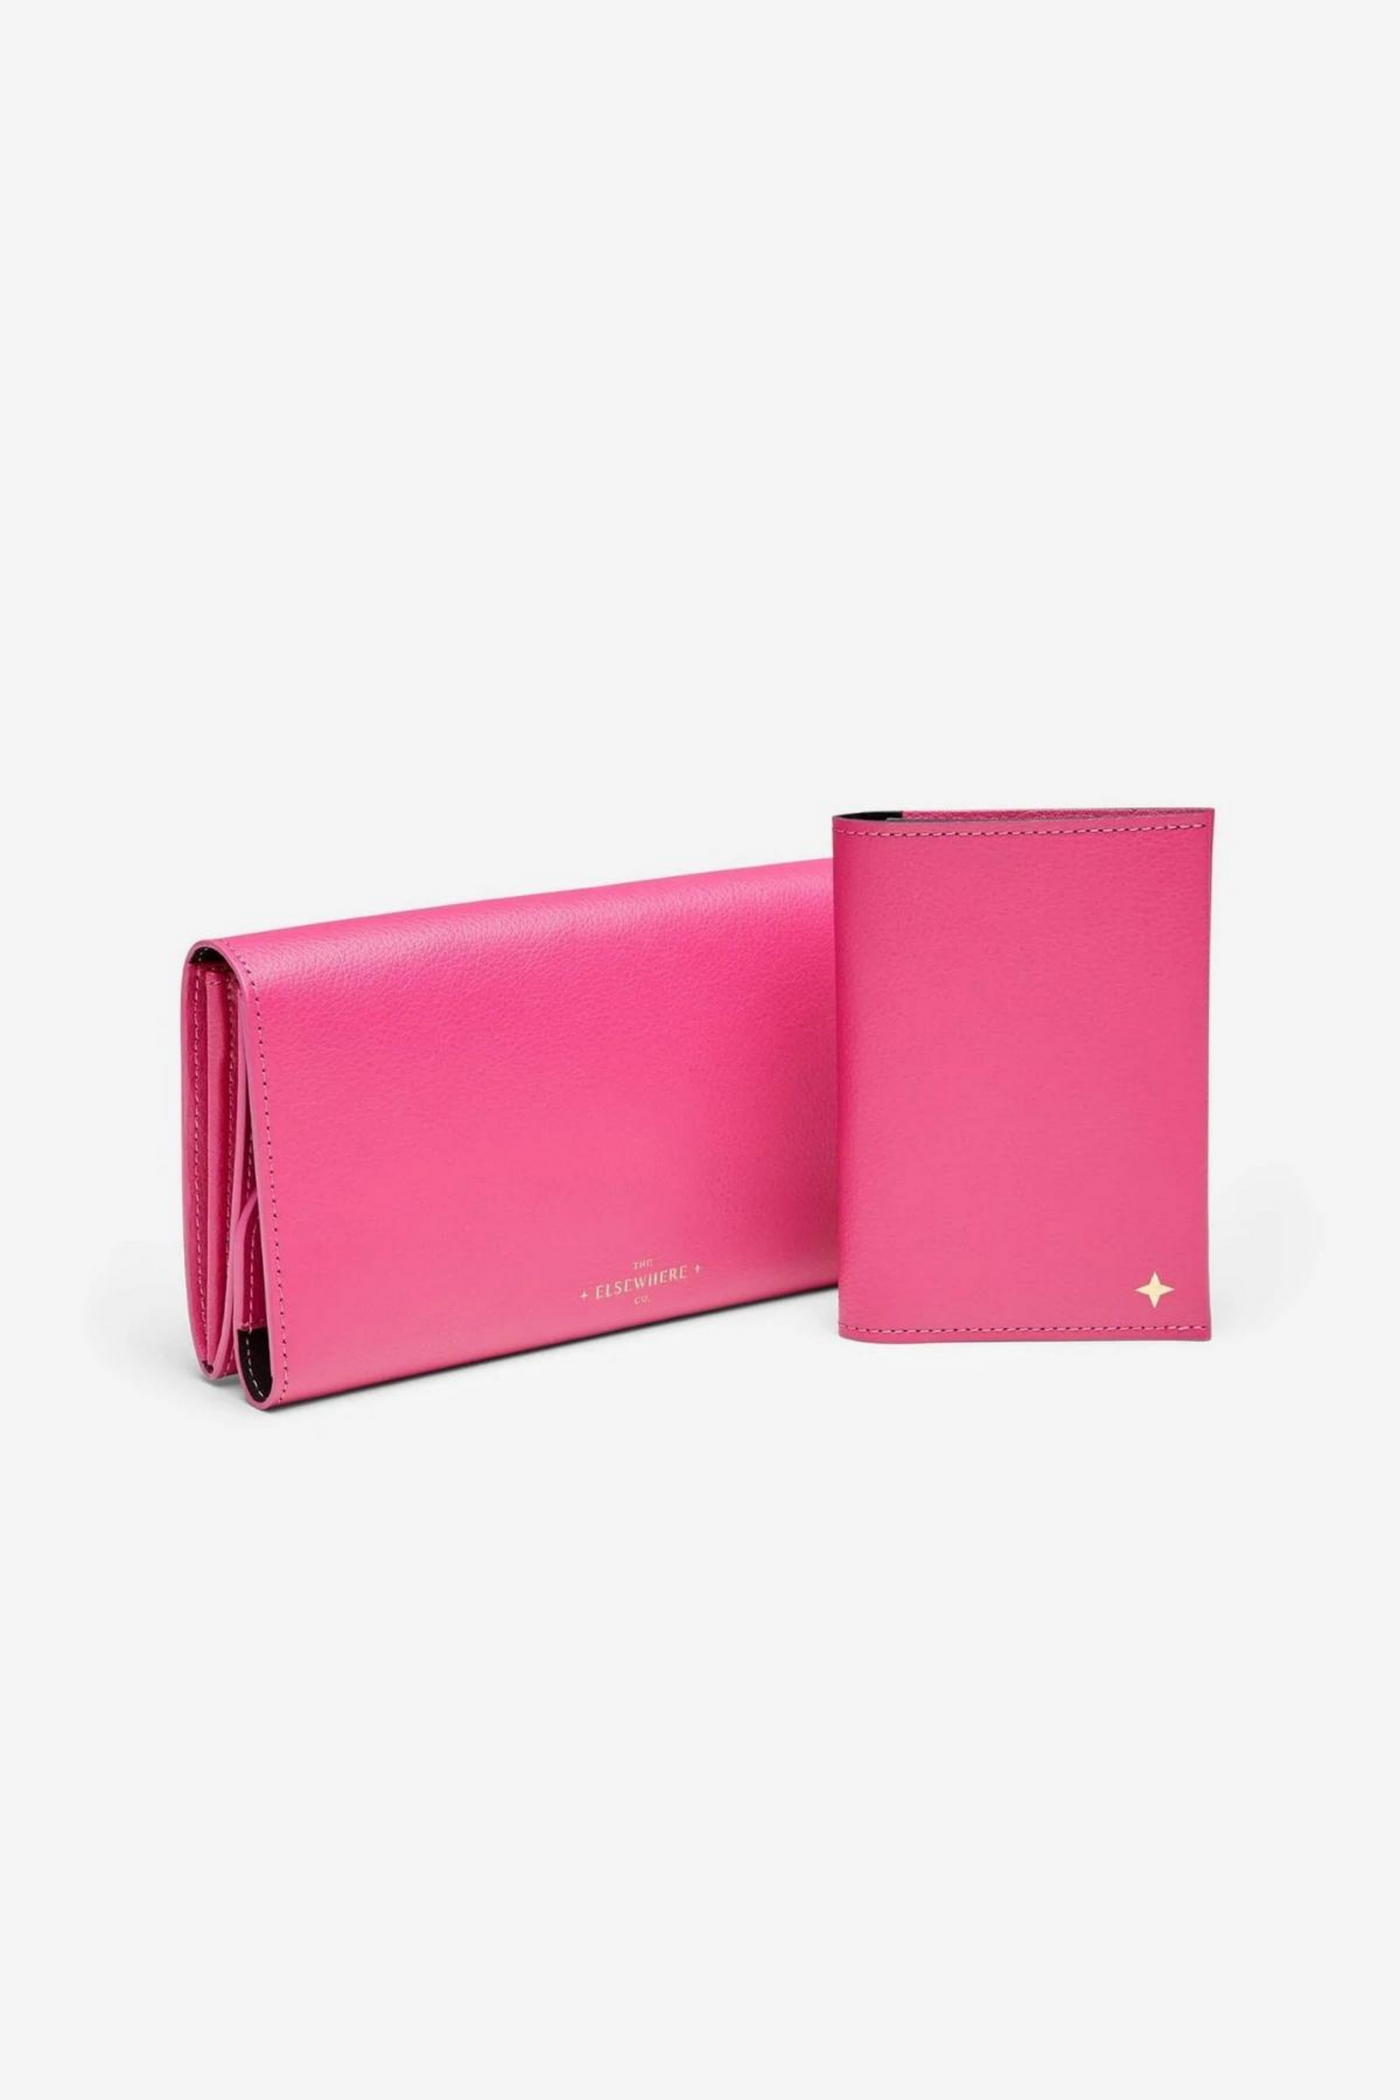 The Elsewhere Co. Travel Wallet Set in Paradise Pink, available on ZERRIN with free Singapore shipping